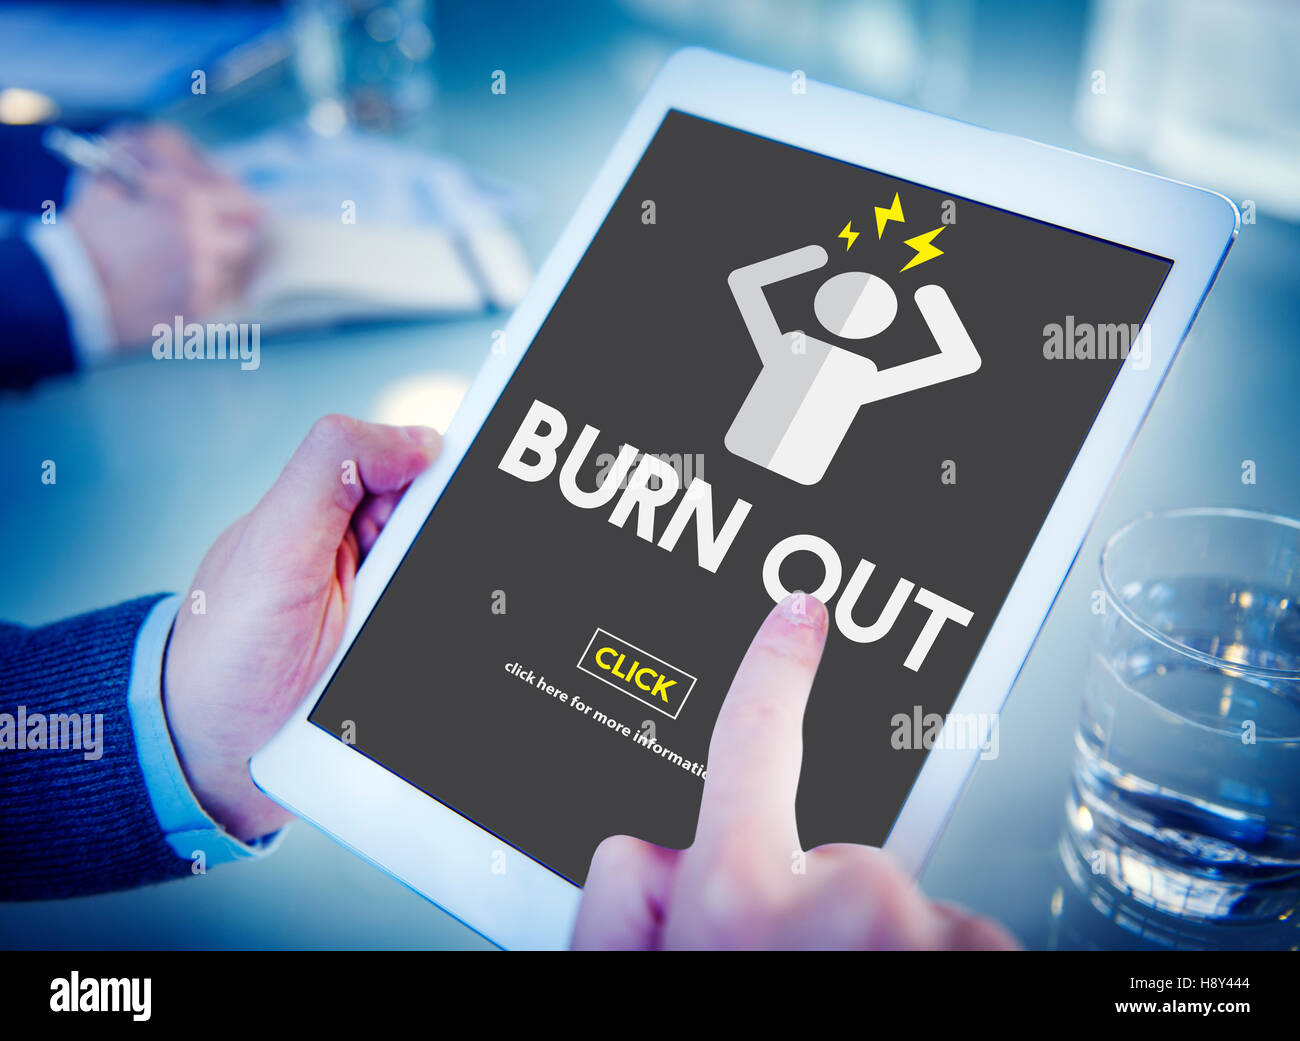 Burn out Stress Tired Overworked Concept Stock Photo